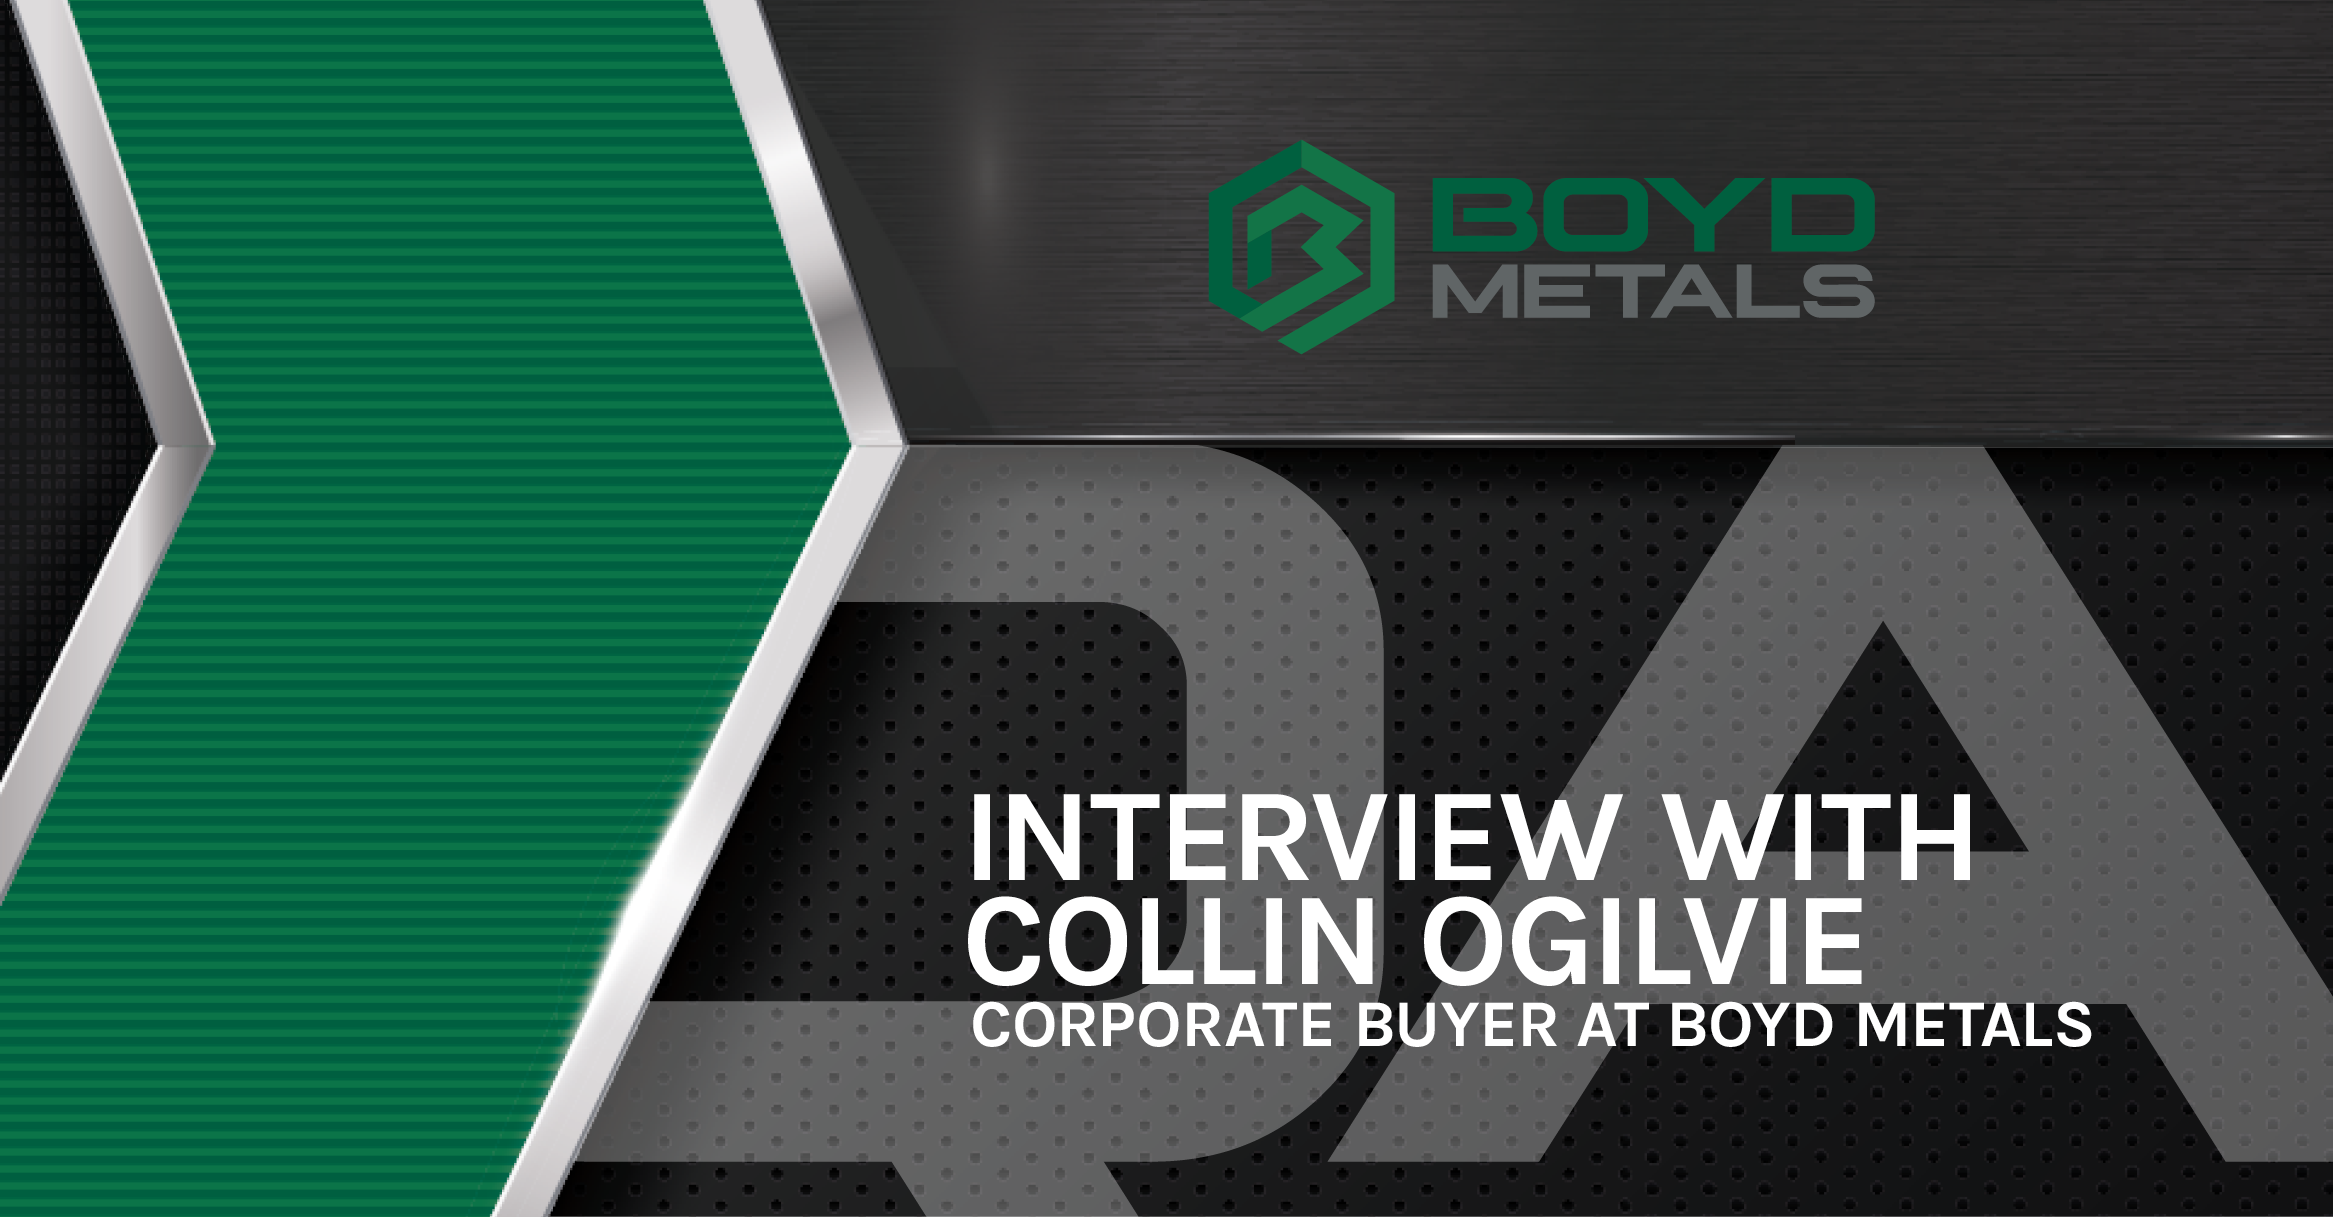 An Interview with Collin Ogilvie: Corporate Buyer at Boyd Metals